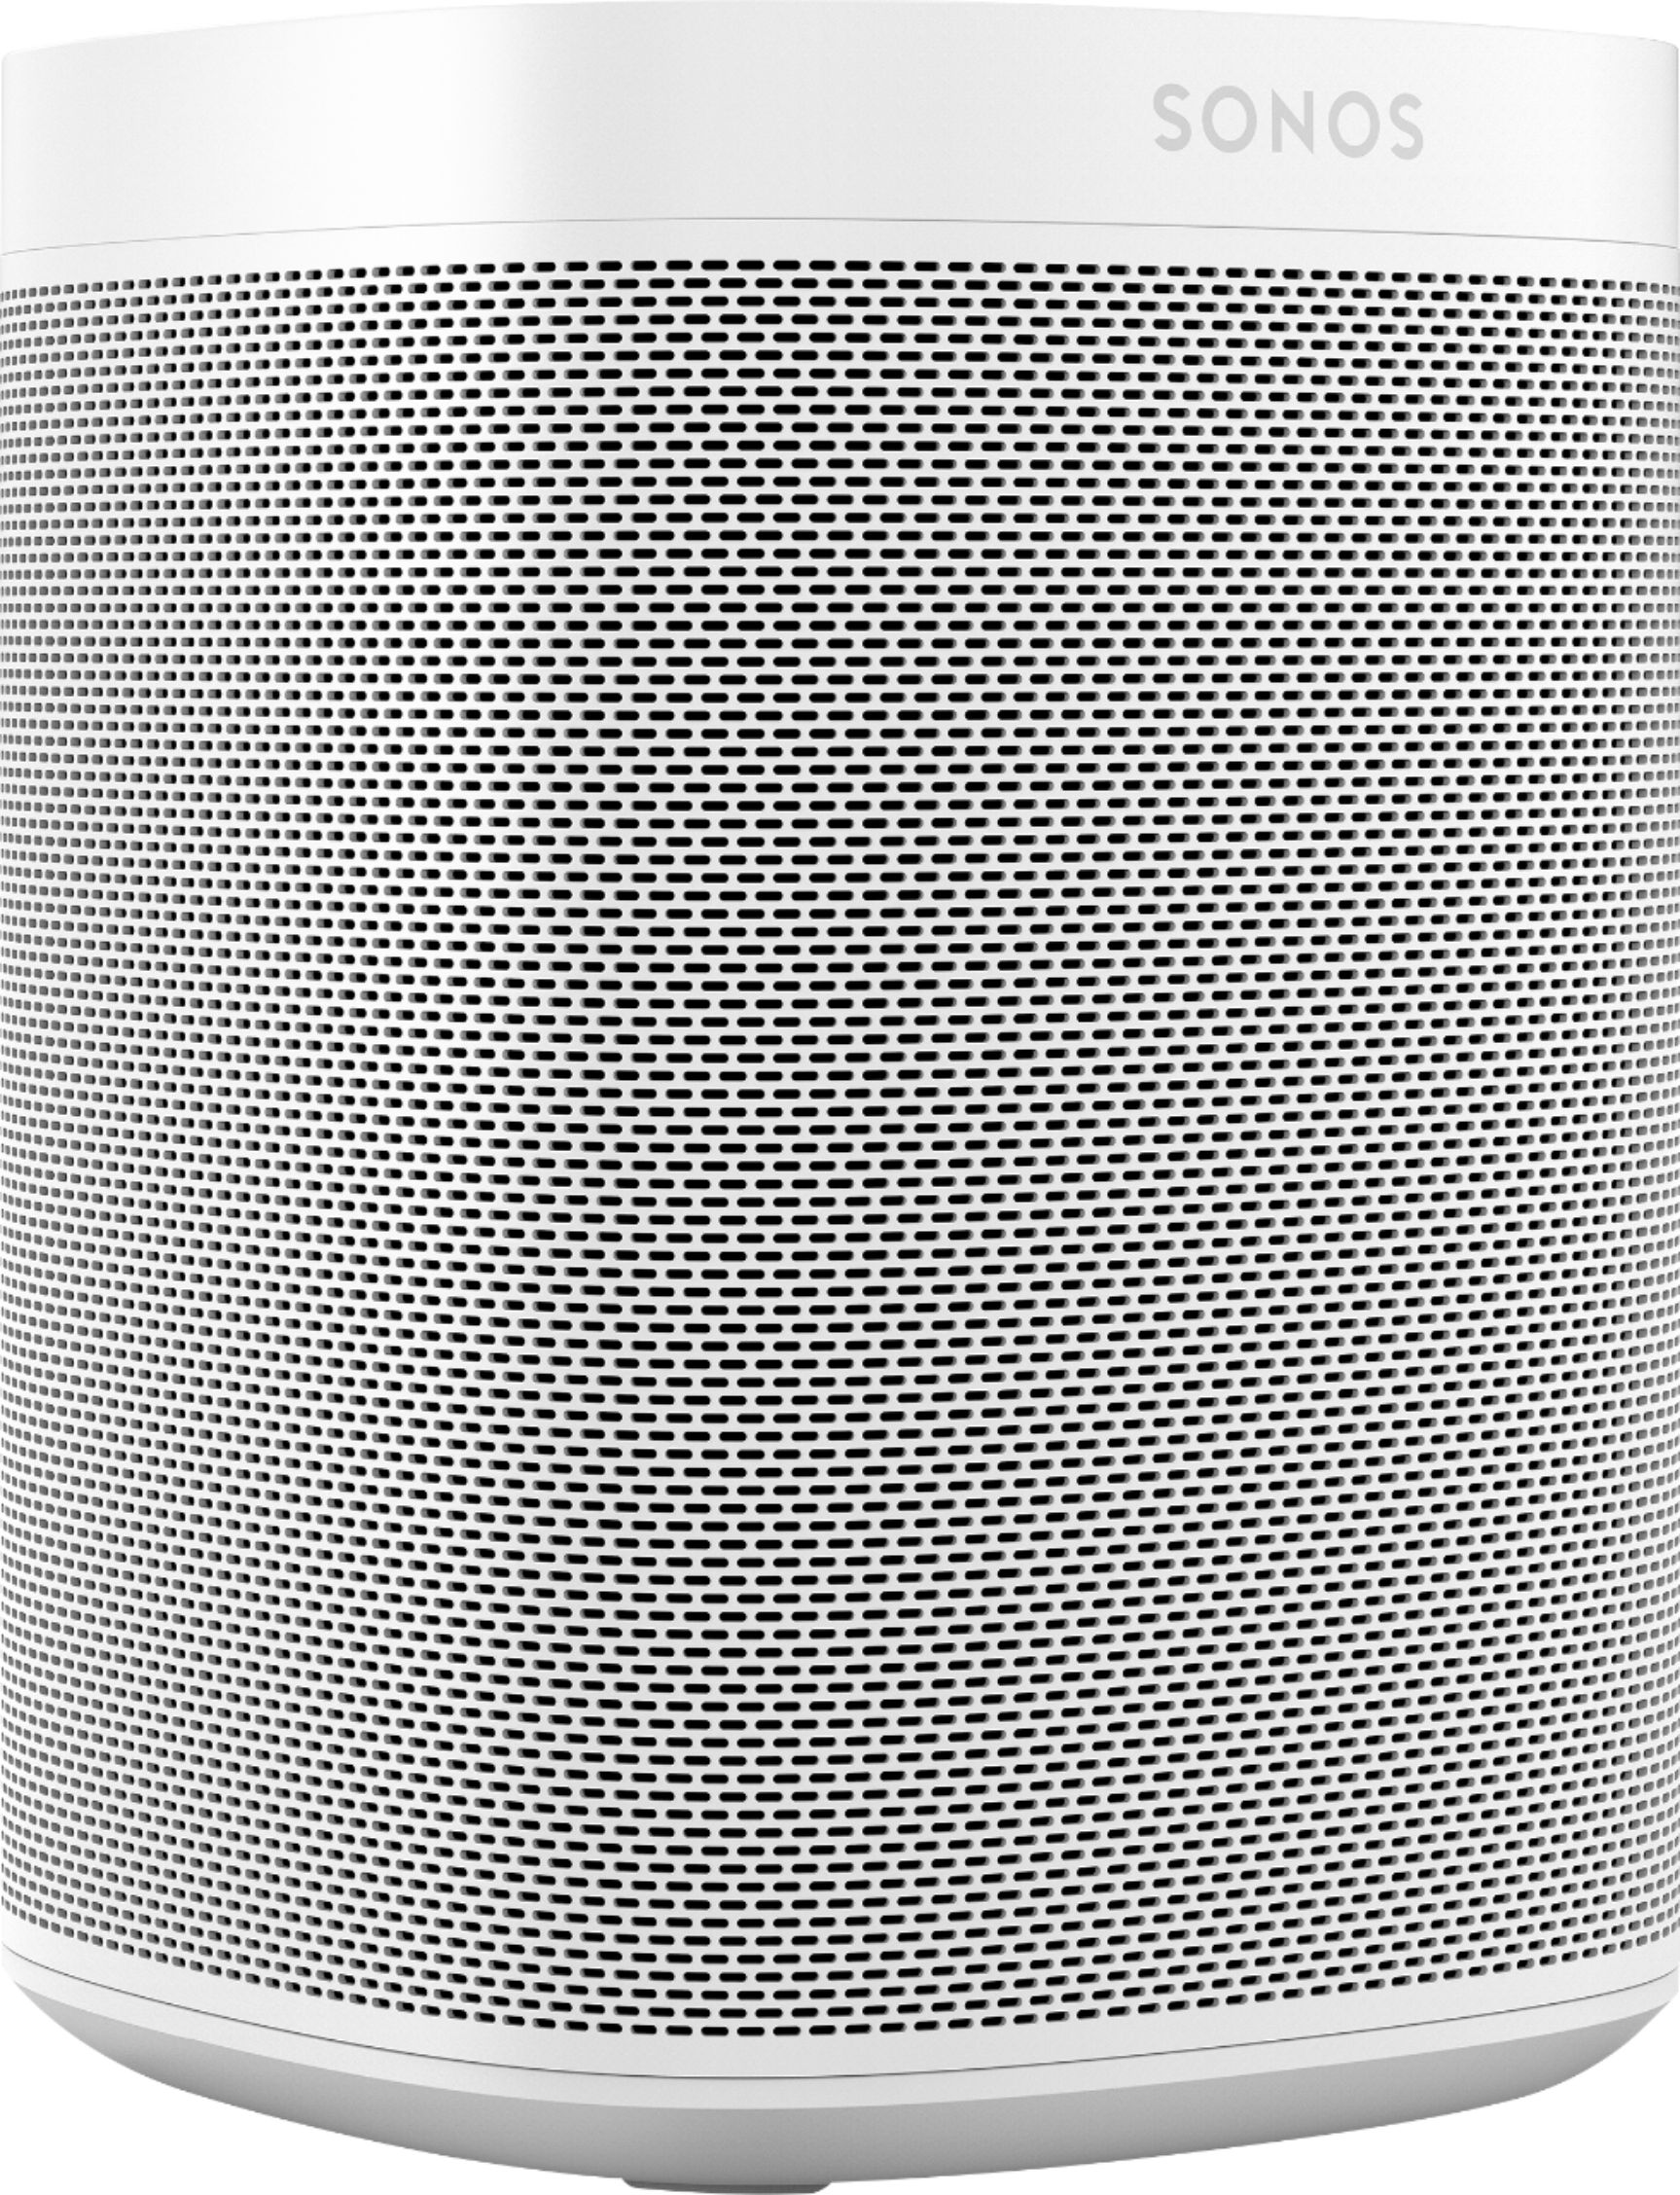 Angle View: Sonos - Geek Squad Certified Refurbished One (Gen2) Wireless Smart Speaker with Amazon Alexa Voice Assistant - White